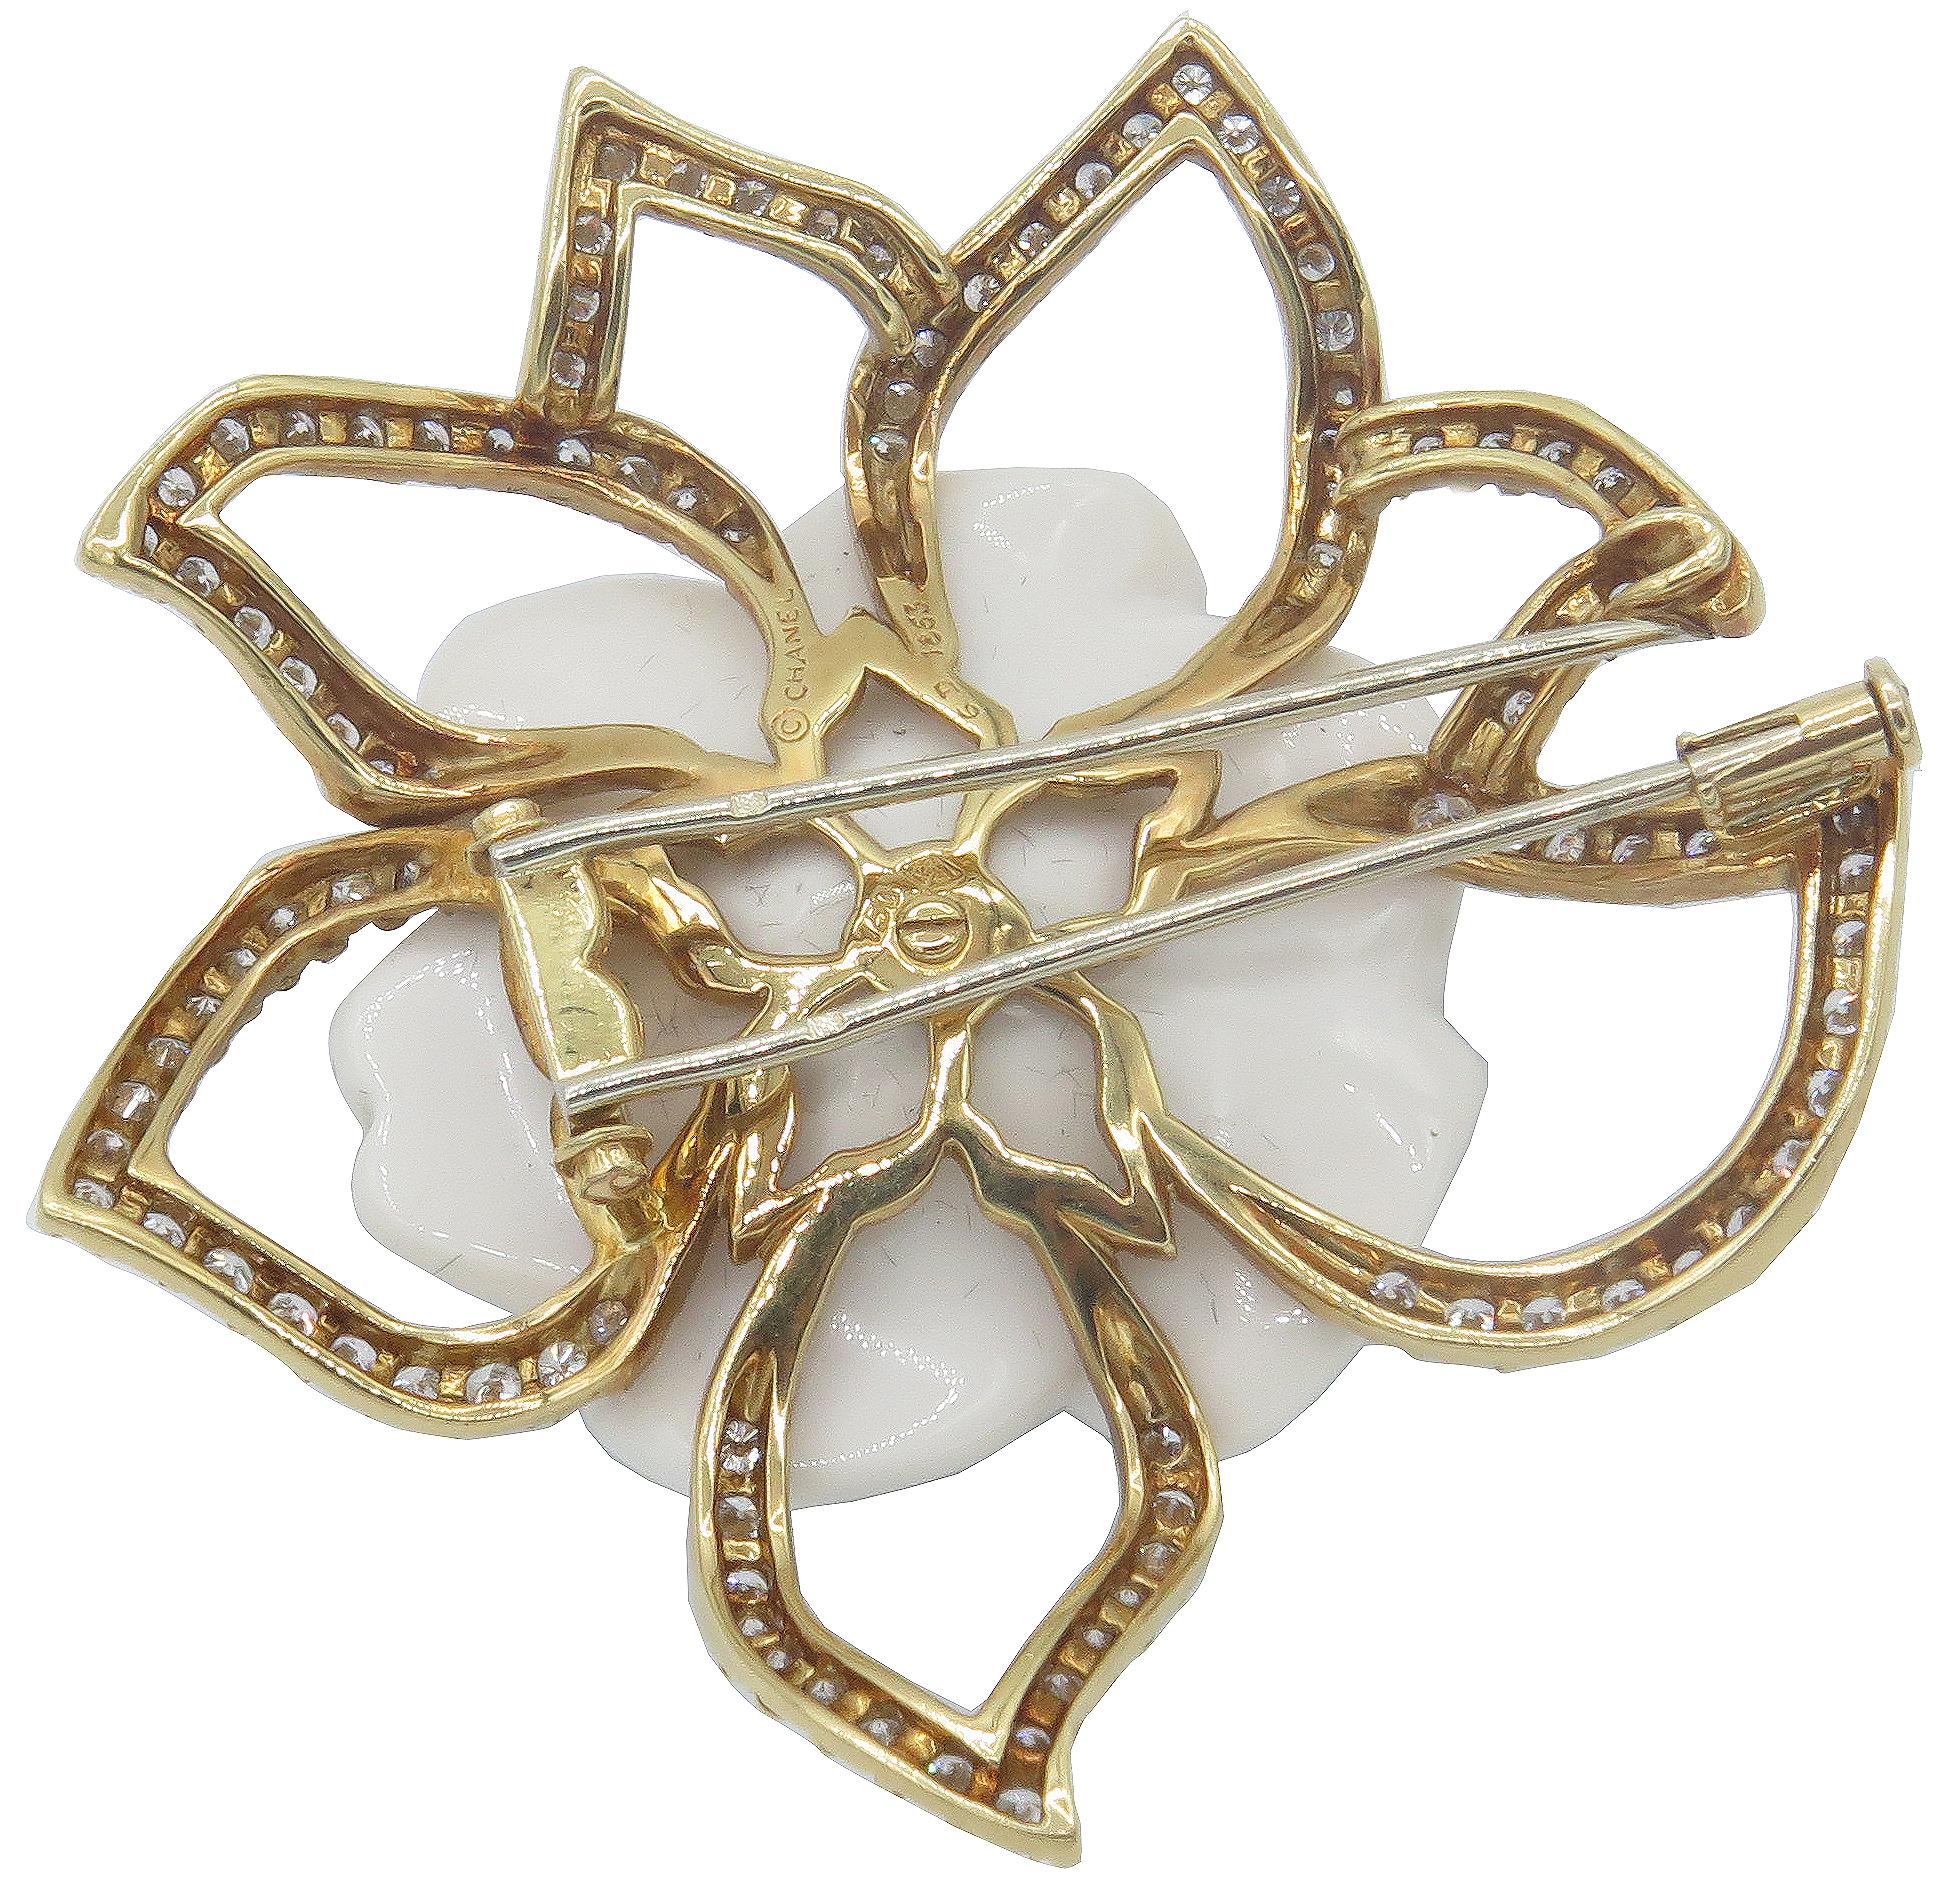 The white Camilla was Coco Chanel’s favorite flower and it was used in many of her jewelry designs. This beautiful brooch is a rare and iconic piece of Chanel fine jewelry . In the center of the brooch, is the classic white Camilla. 18kt gold petals